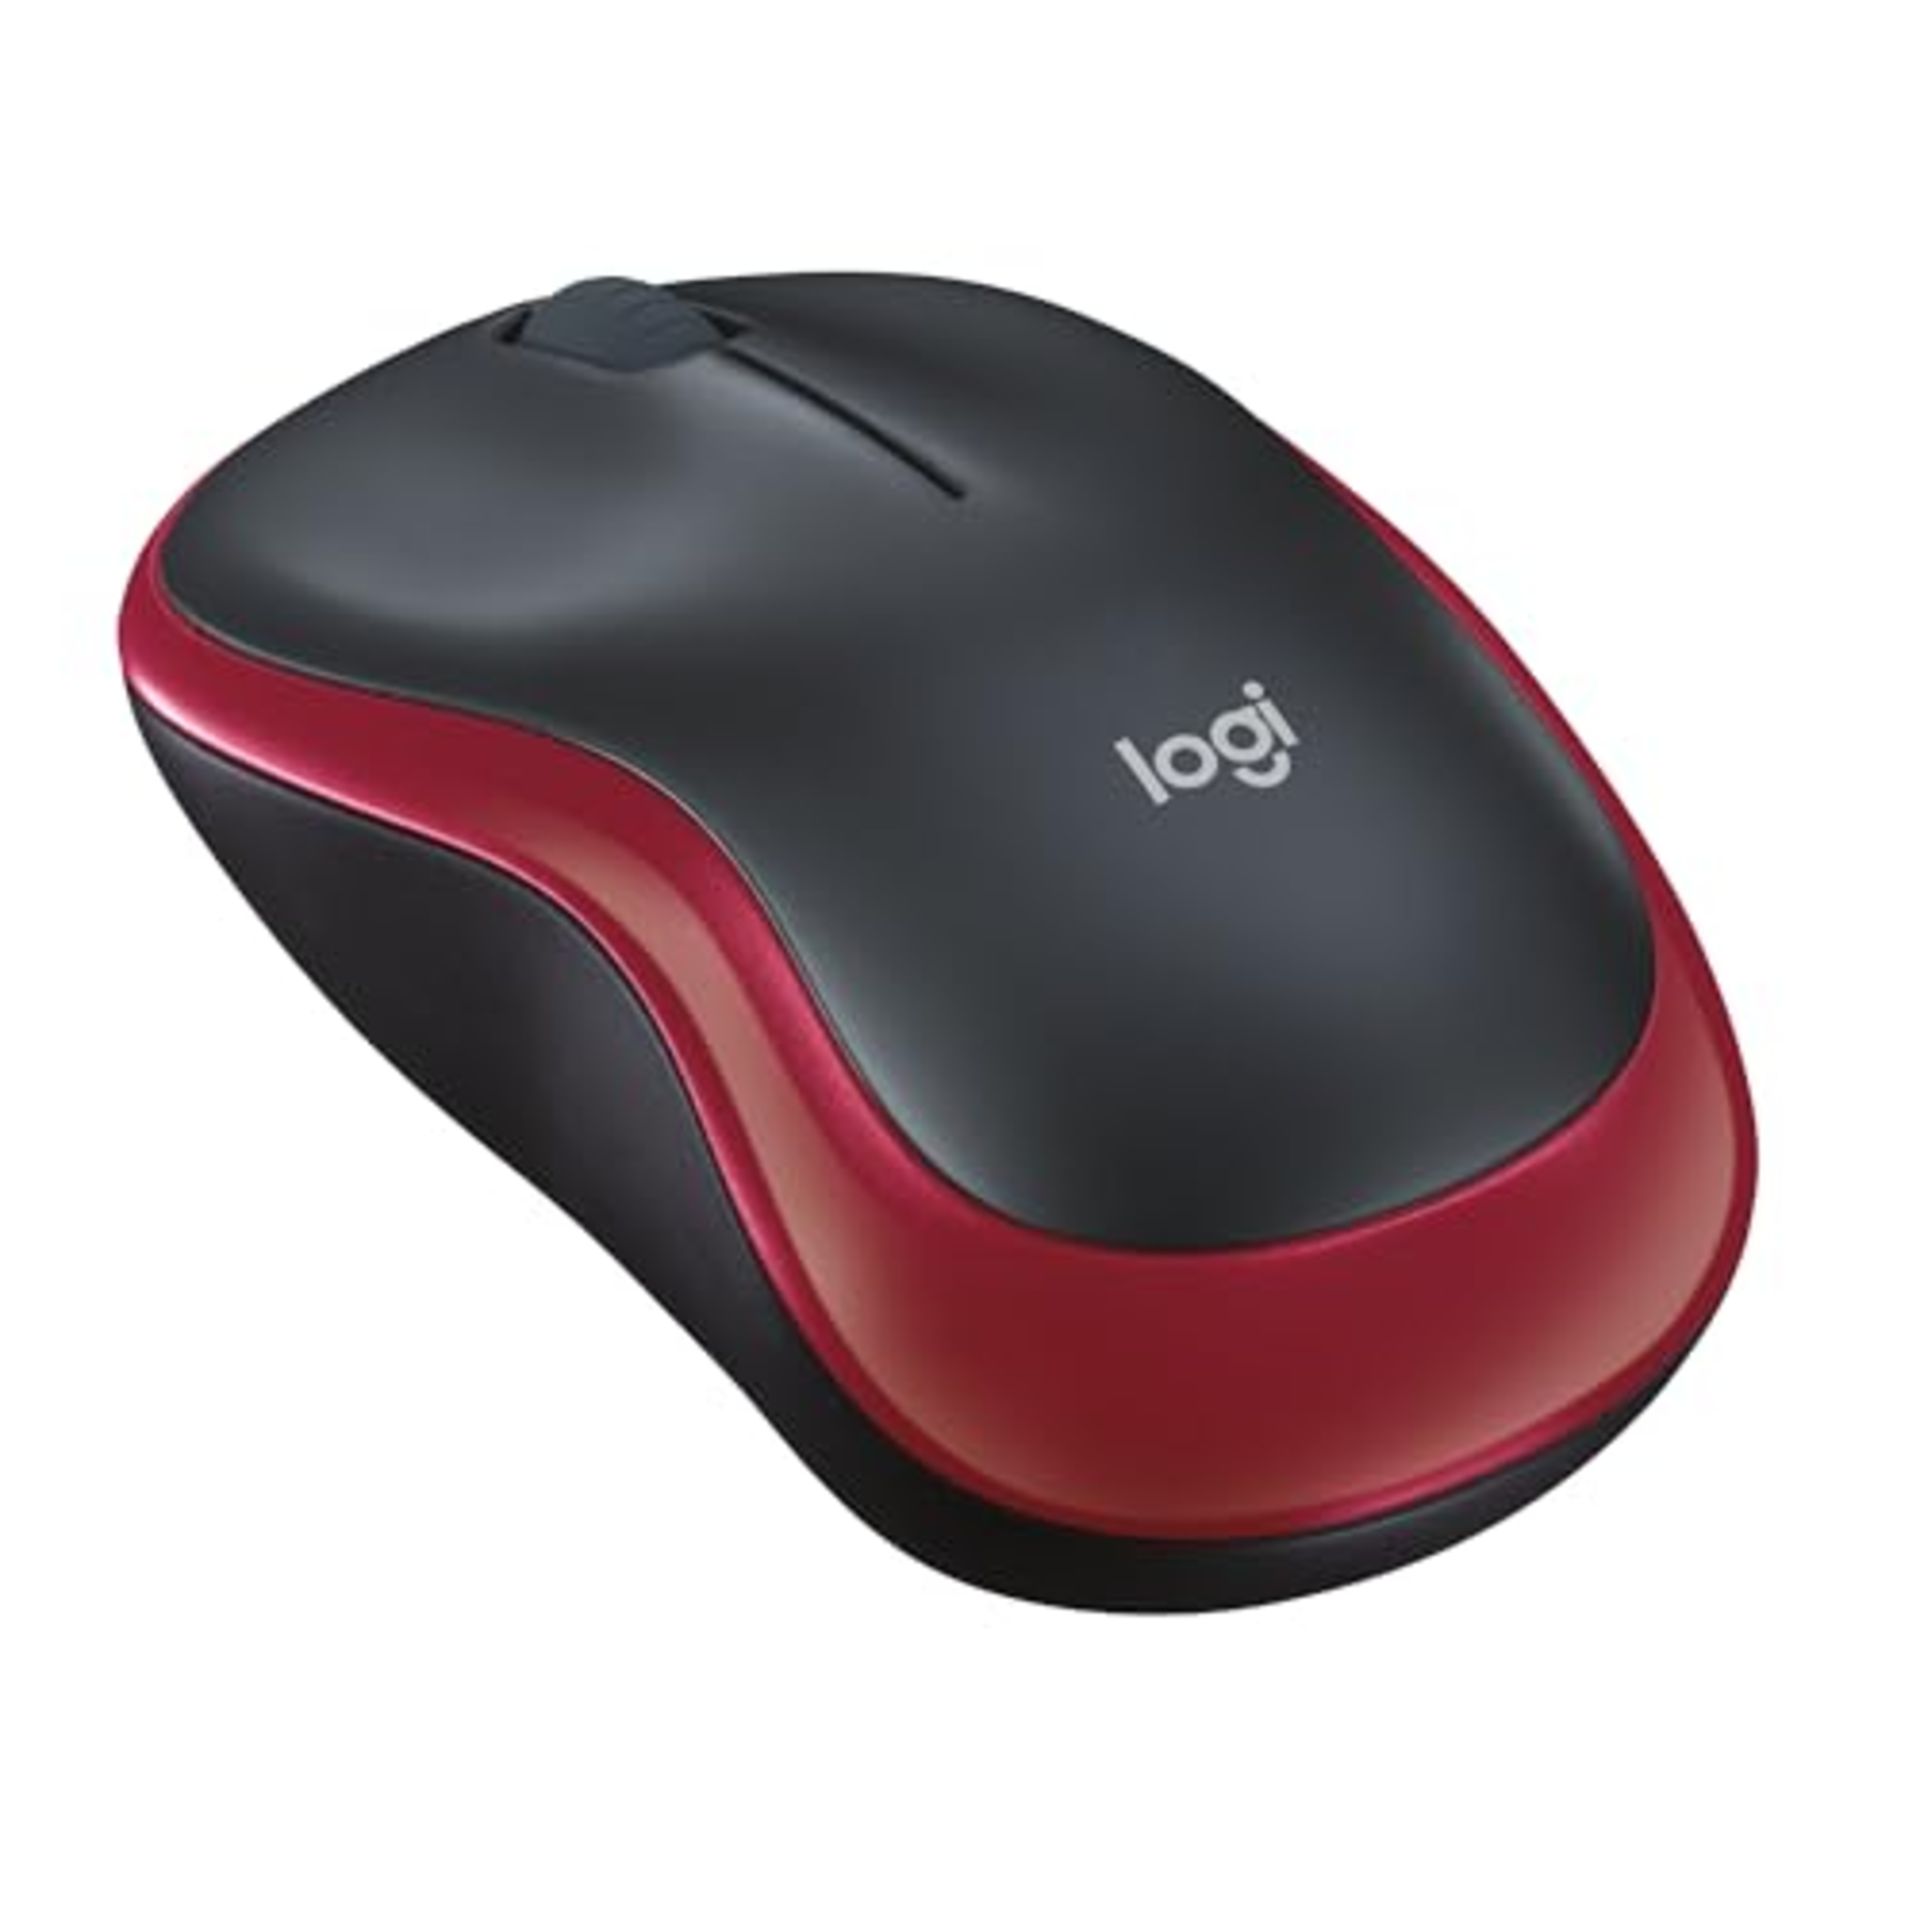 Logitech M185 Wireless Mouse, 2.4 GHz with Mini USB Receiver, 12 Month Battery Life, 1